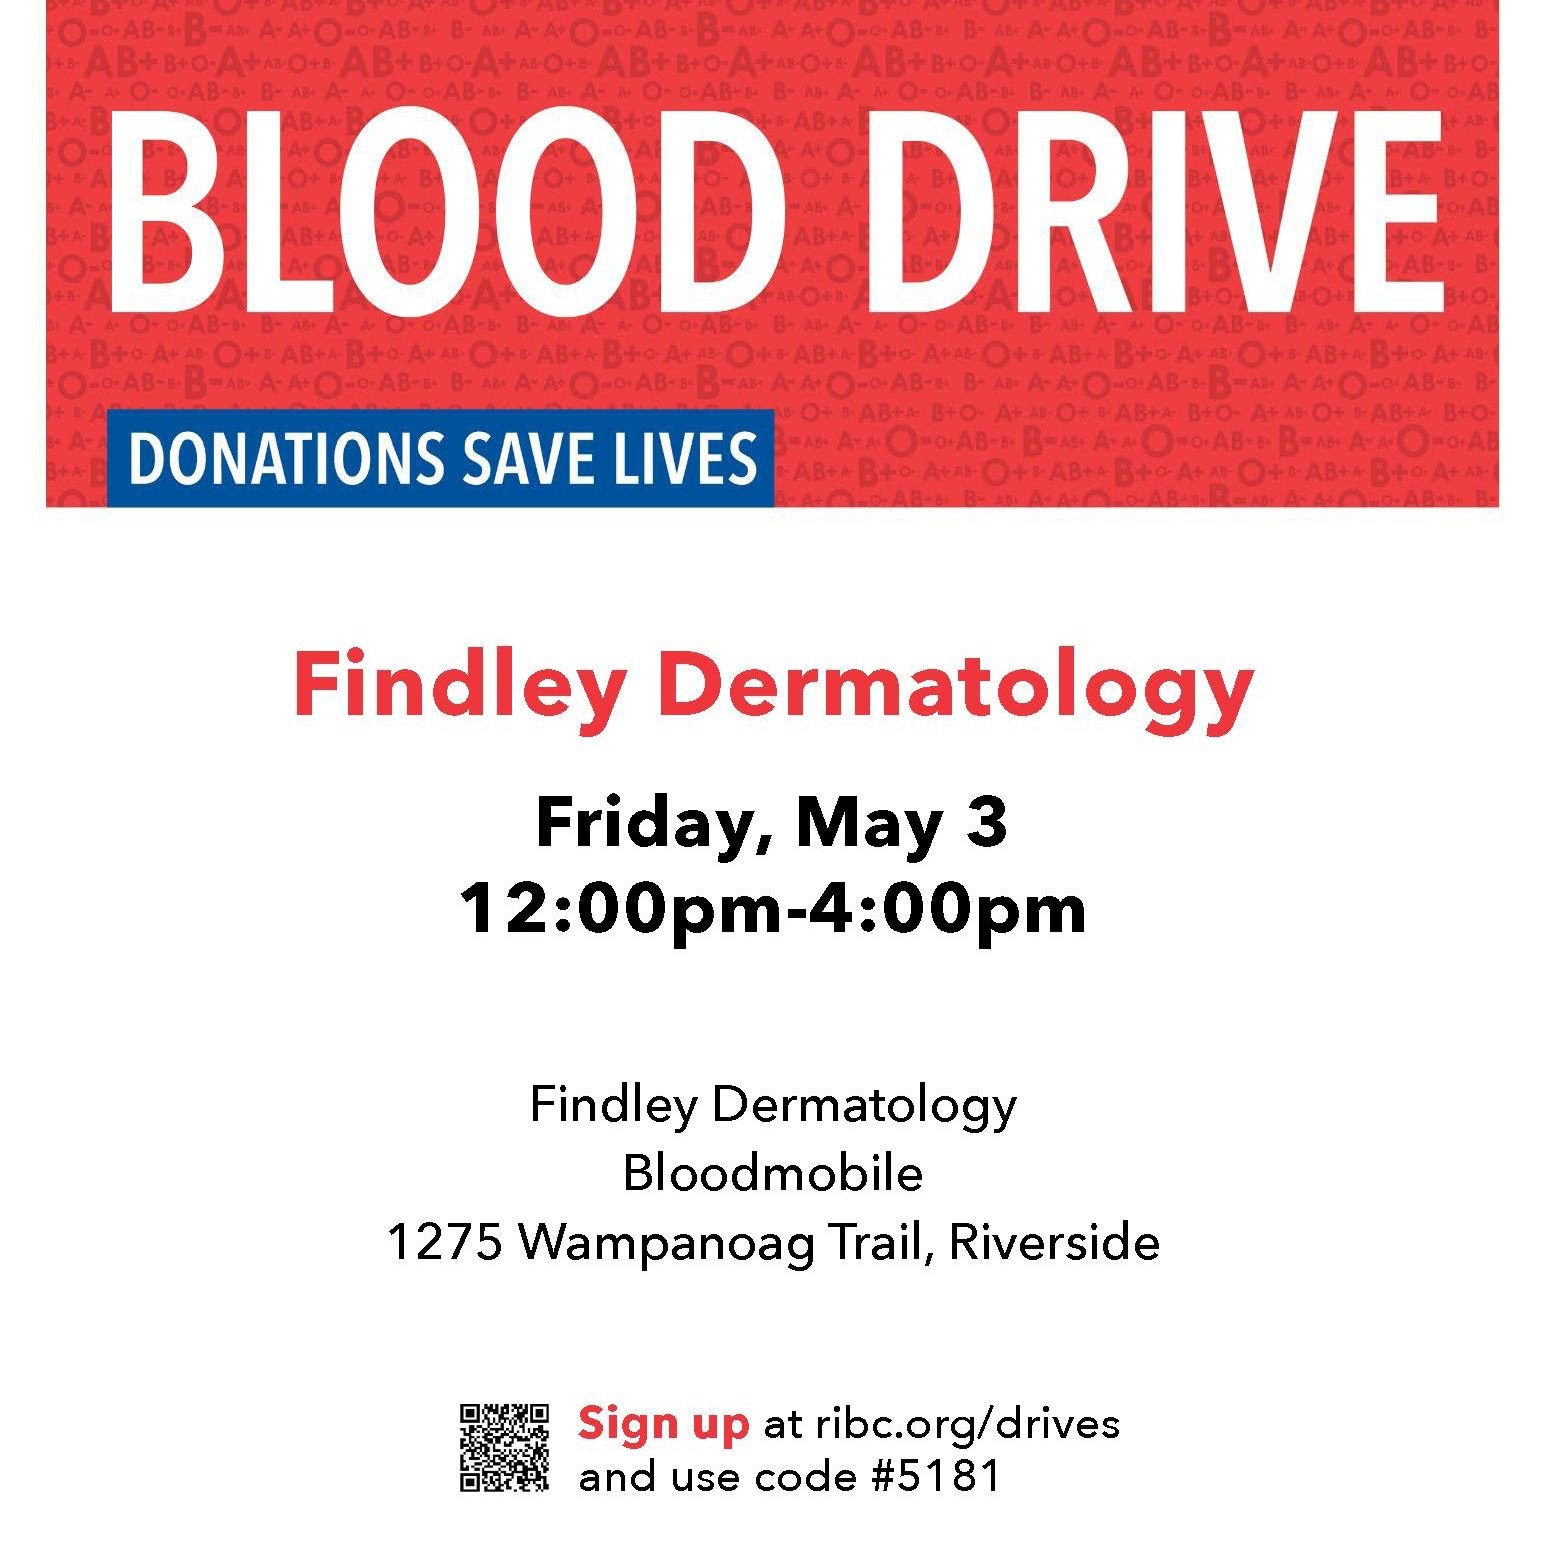 🩸 Join Us for a Life-Saving Event! 🩸 We're teaming up with the Rhode Island Blood Center for a special blood drive on May 3rd from 12:00 - 4:00pm. Your donation can save lives, and we're honored to support this important cause. A big shout-out to A